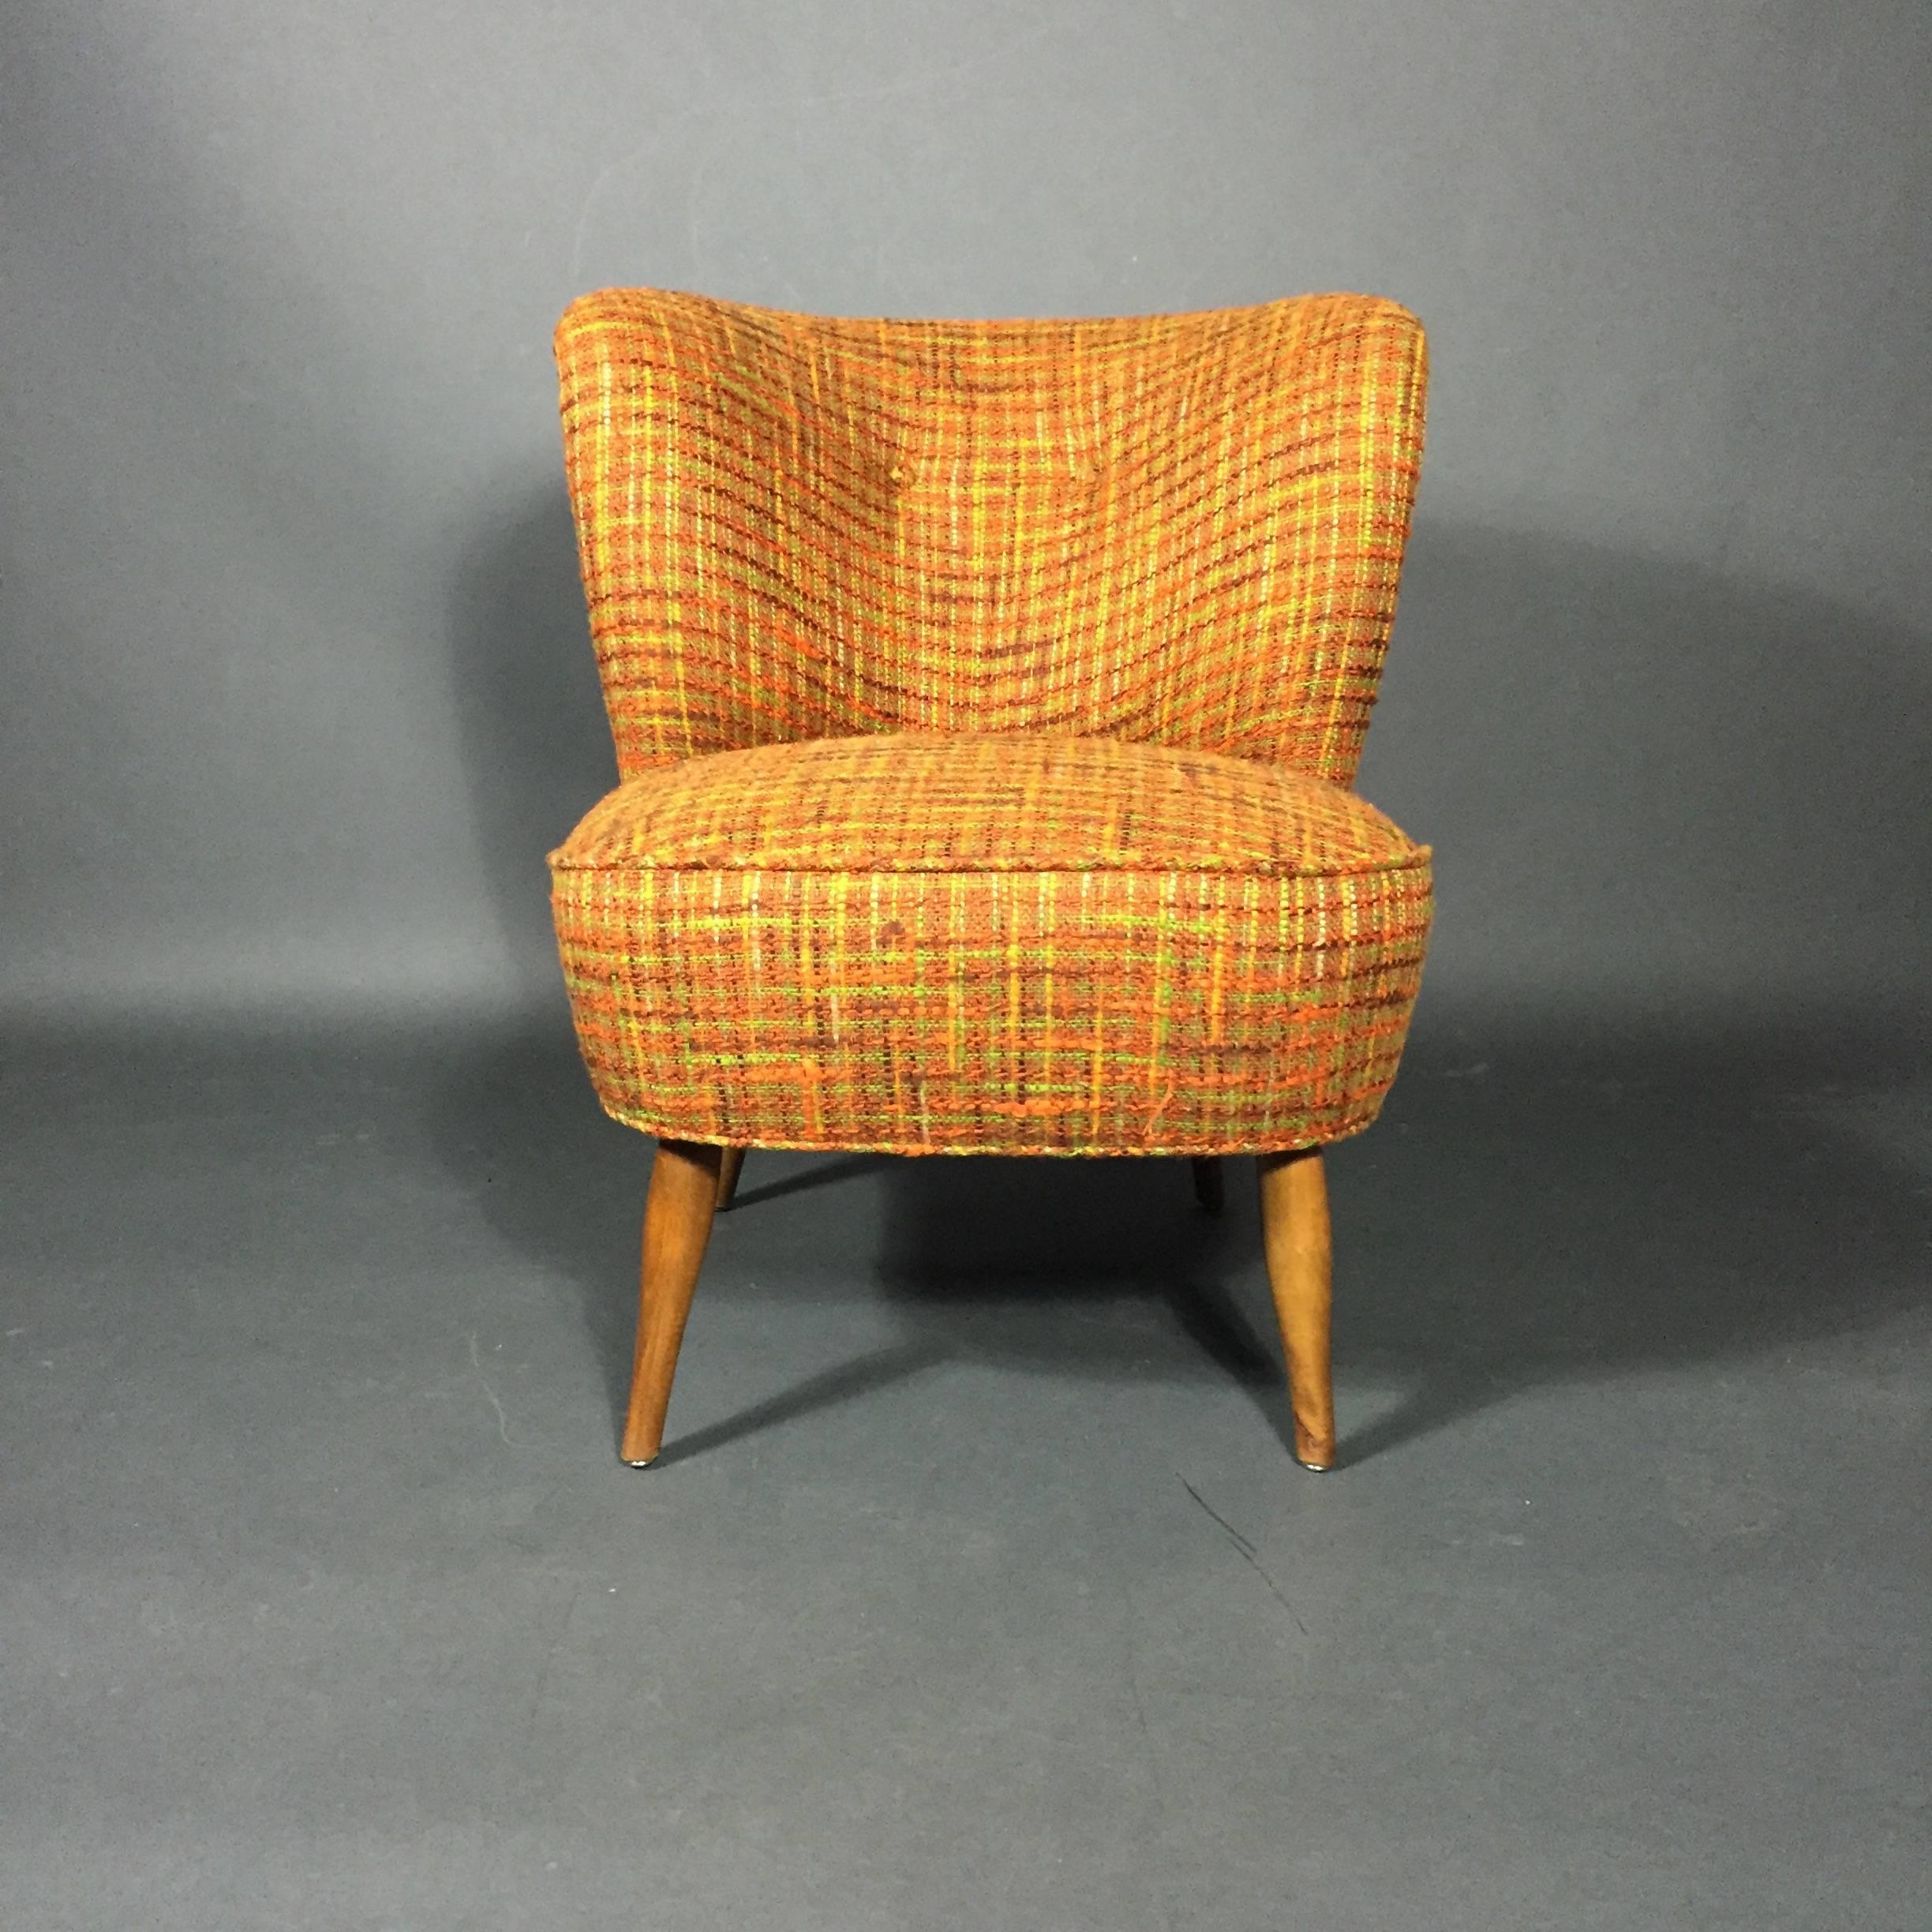 Mid-20th Century Danish Easy Chair, circa 1950s with Vintage Boucle Fabric